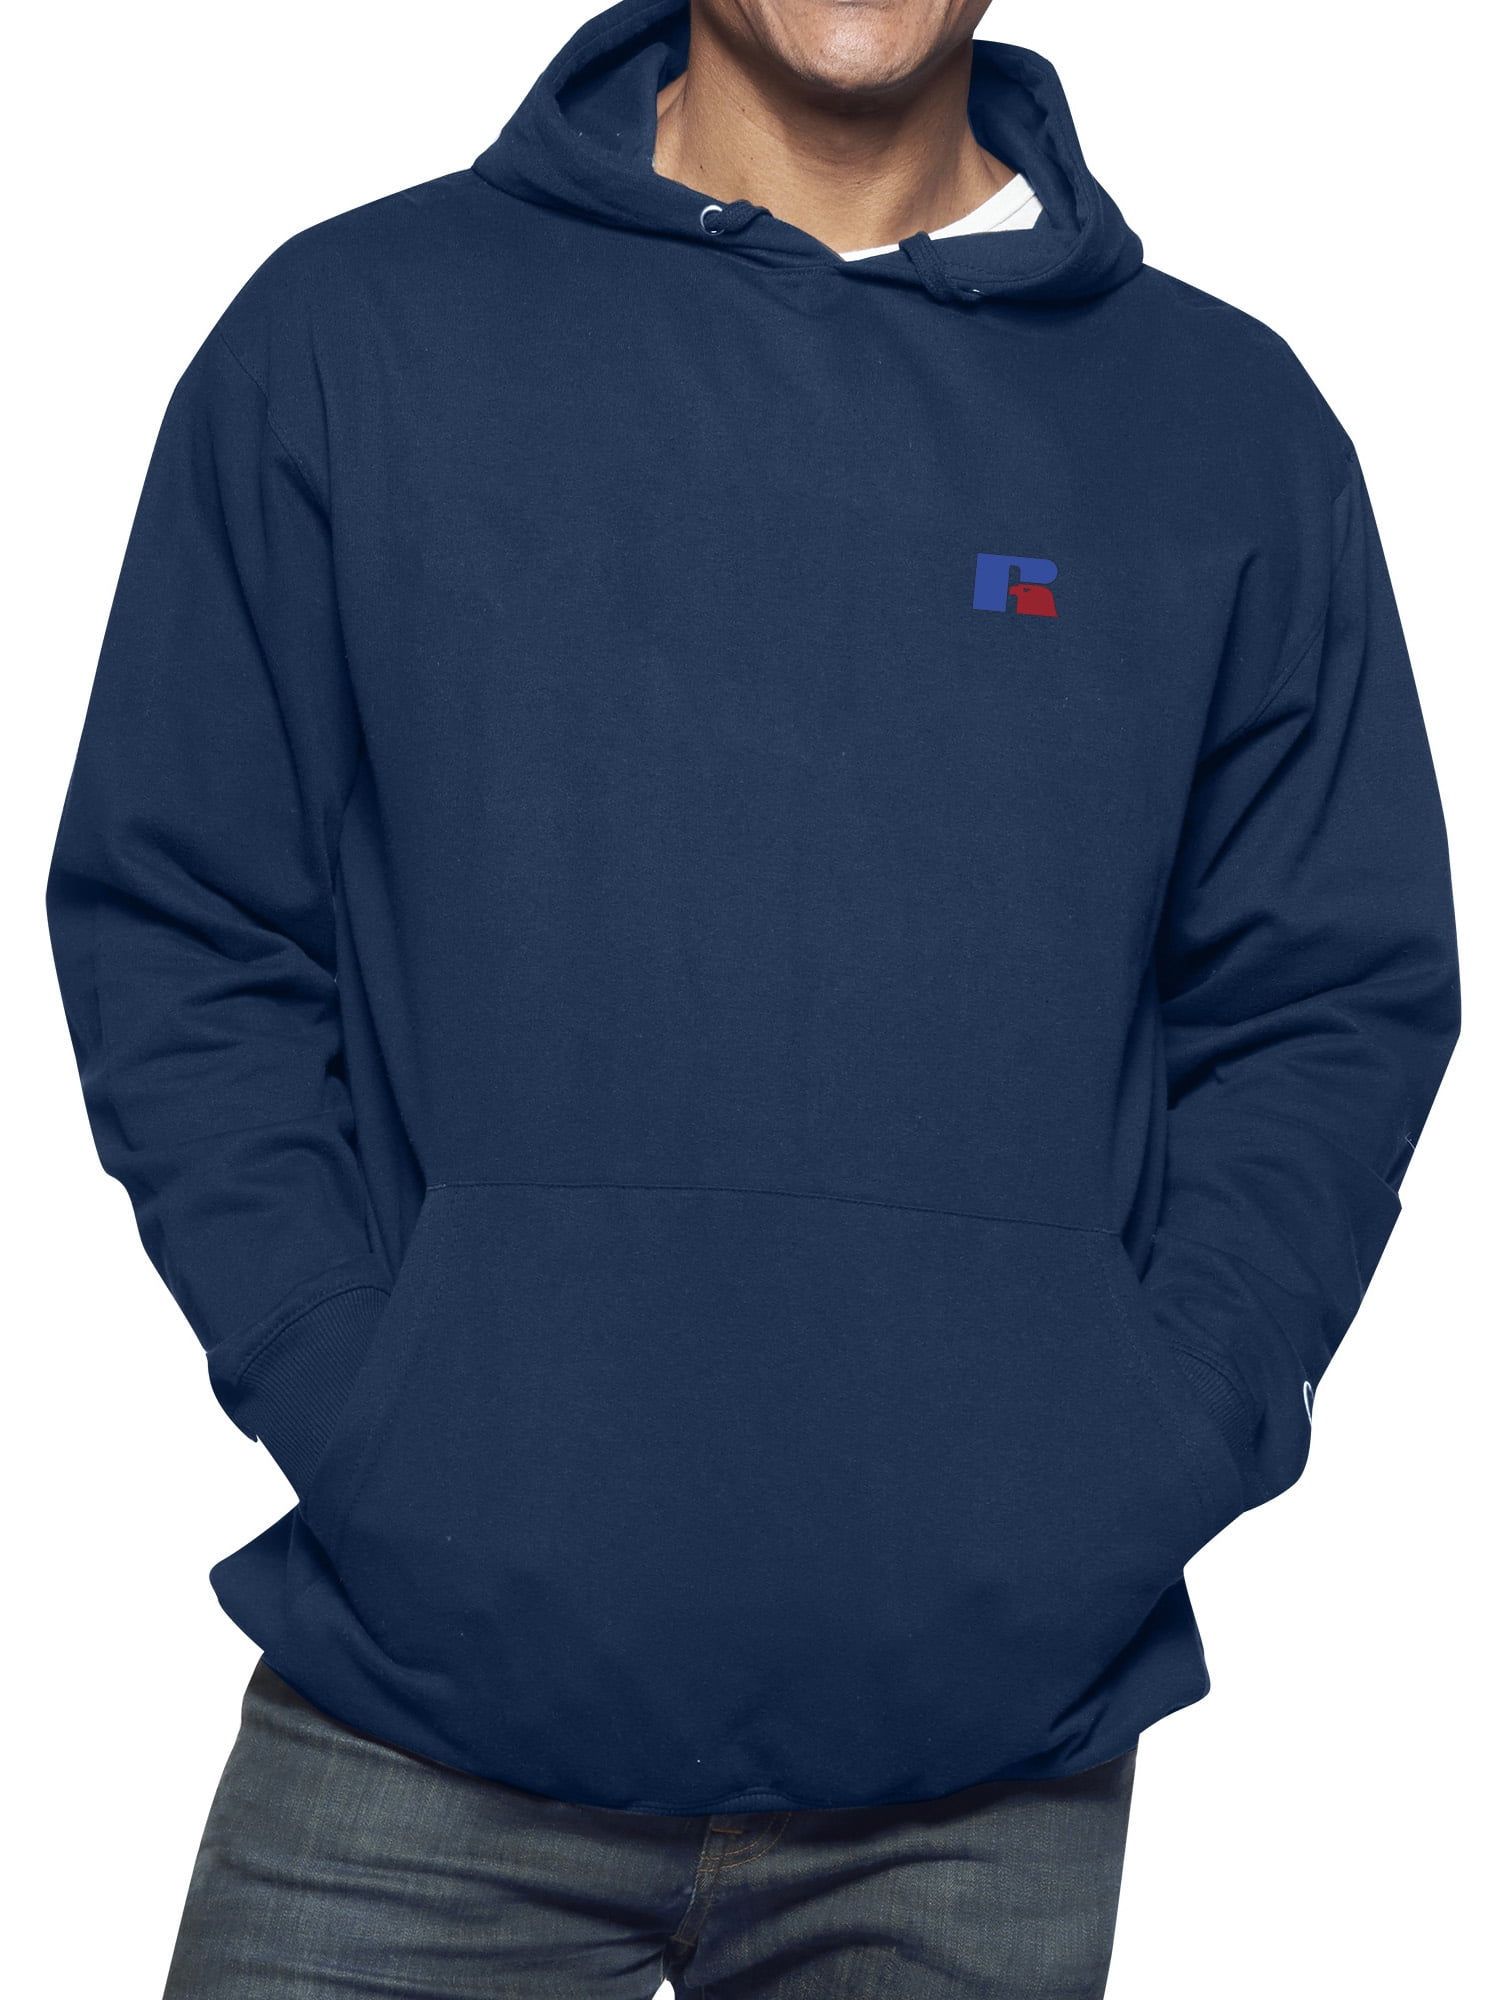 Russell Athletic Big and Tall Hoodie for Men – Pullover Fleece